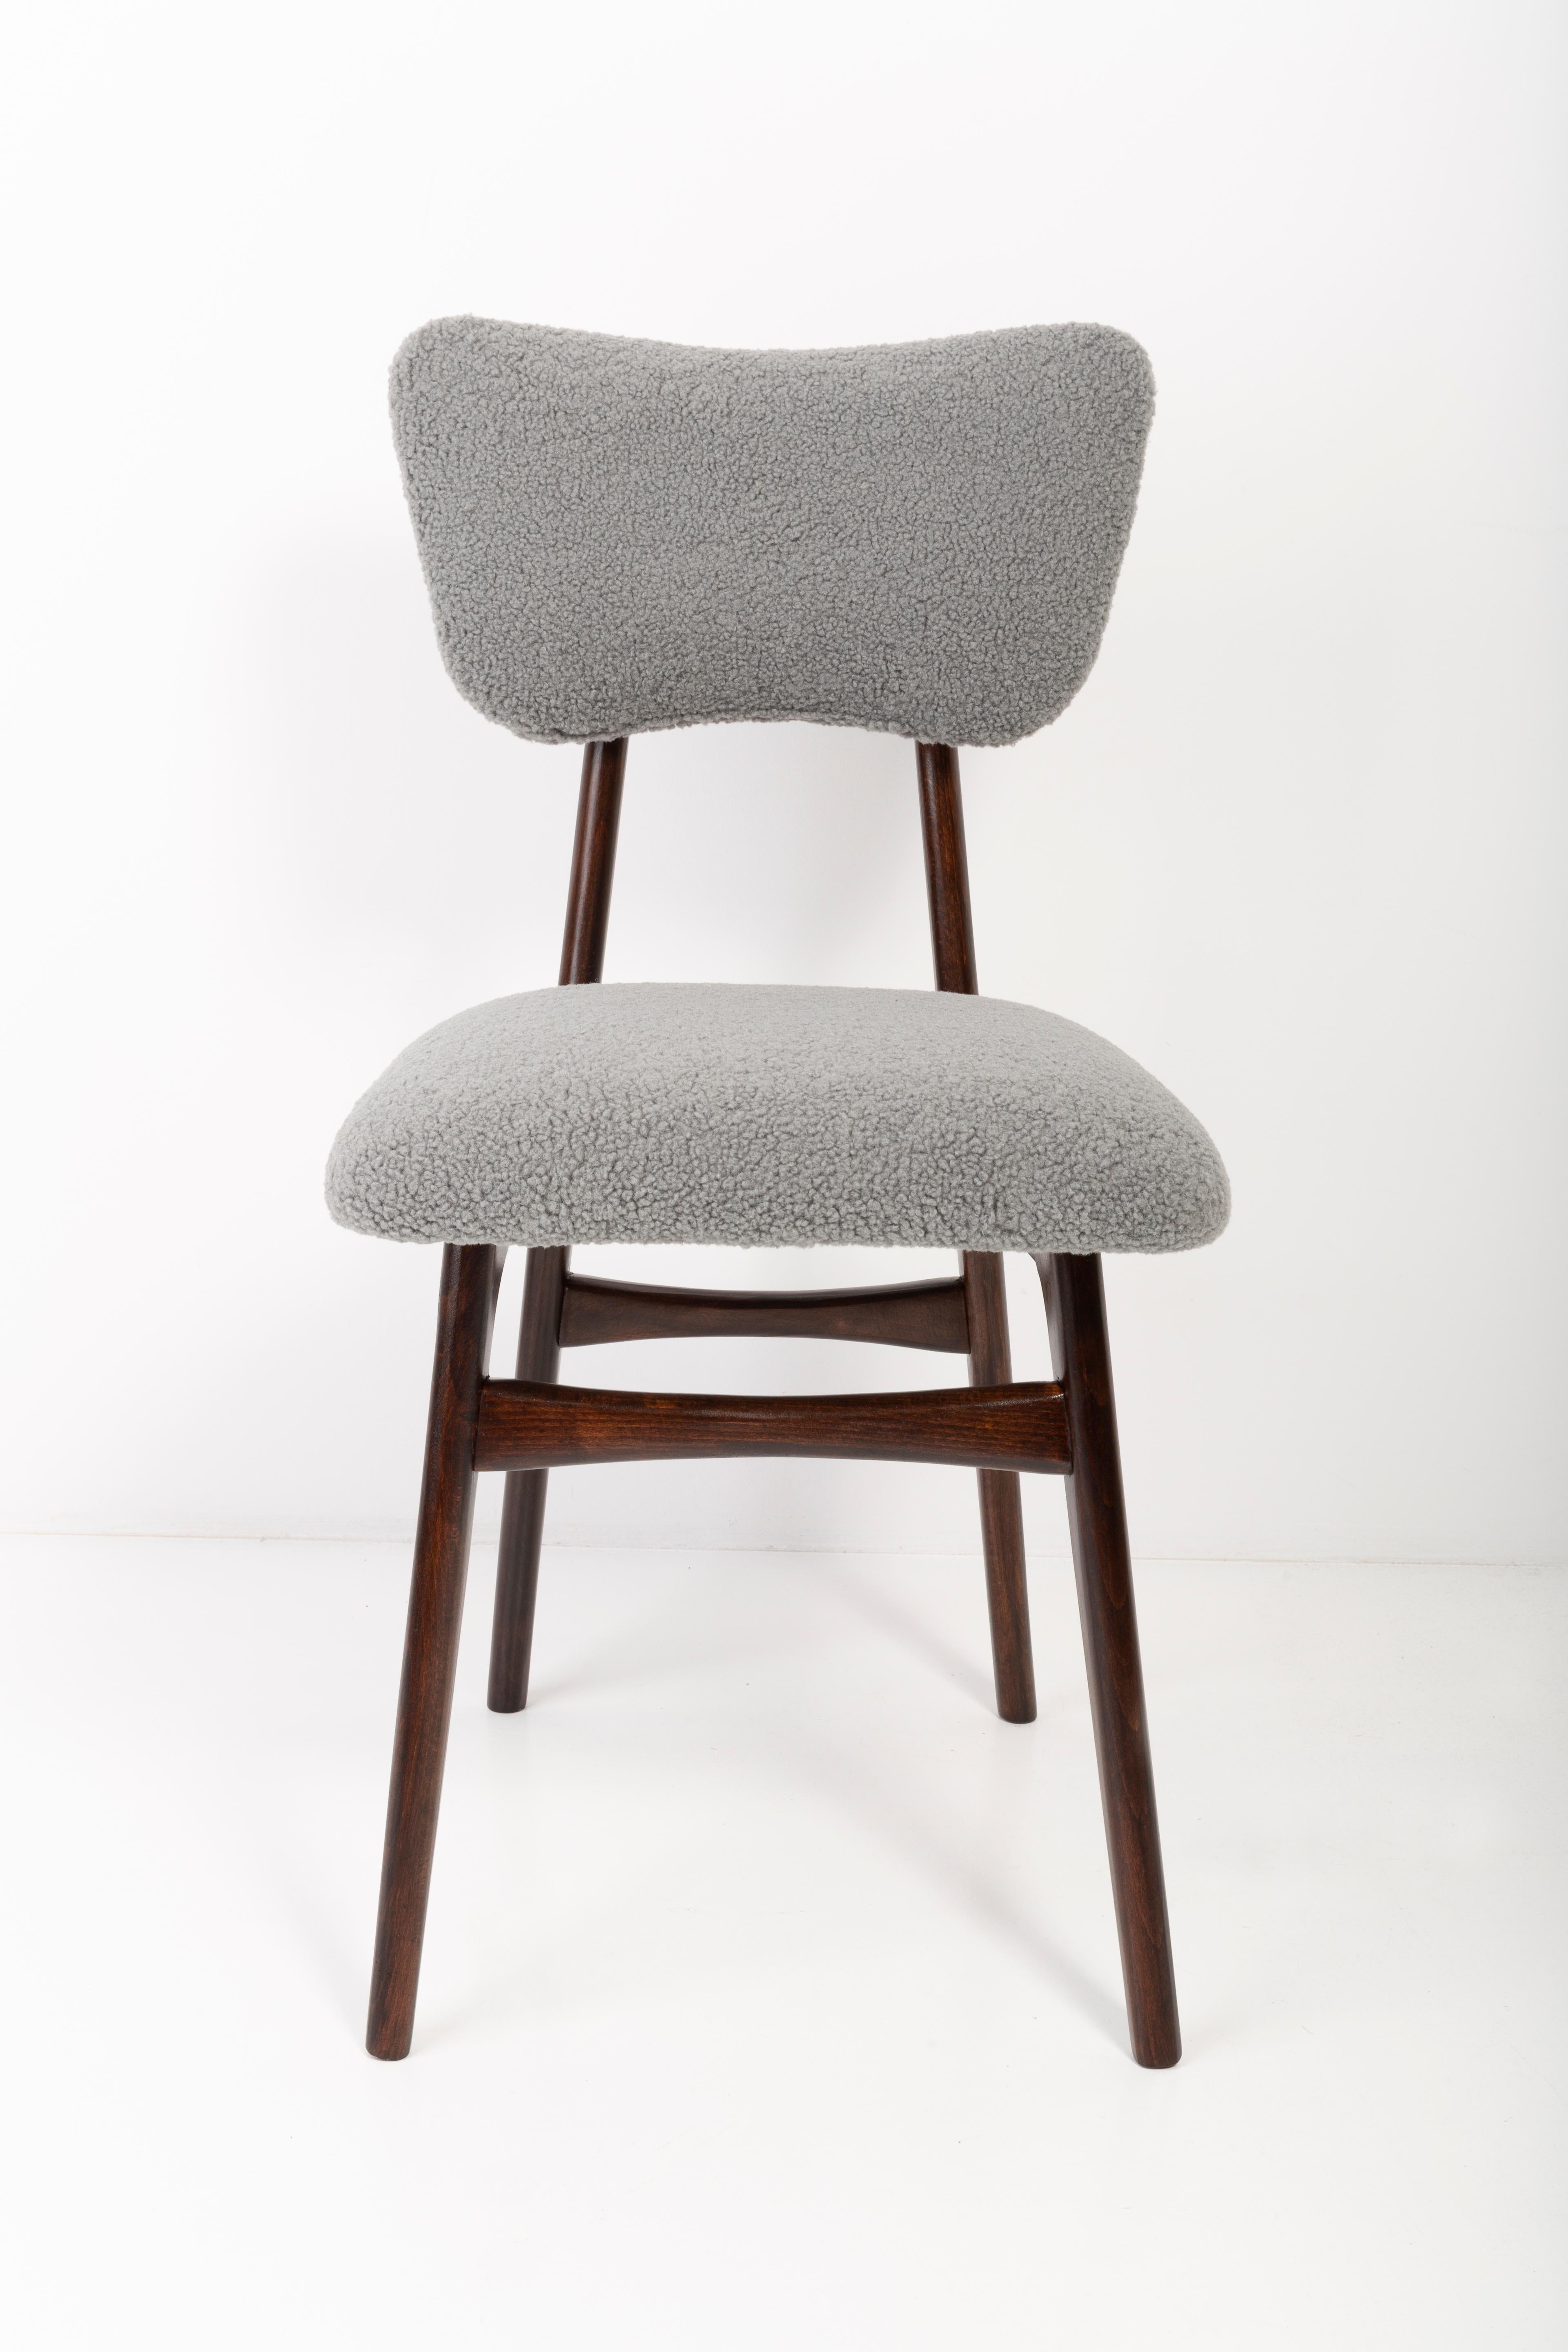 Set of Twelve 20th Century Gray Boucle Chairs, 1960s For Sale 7